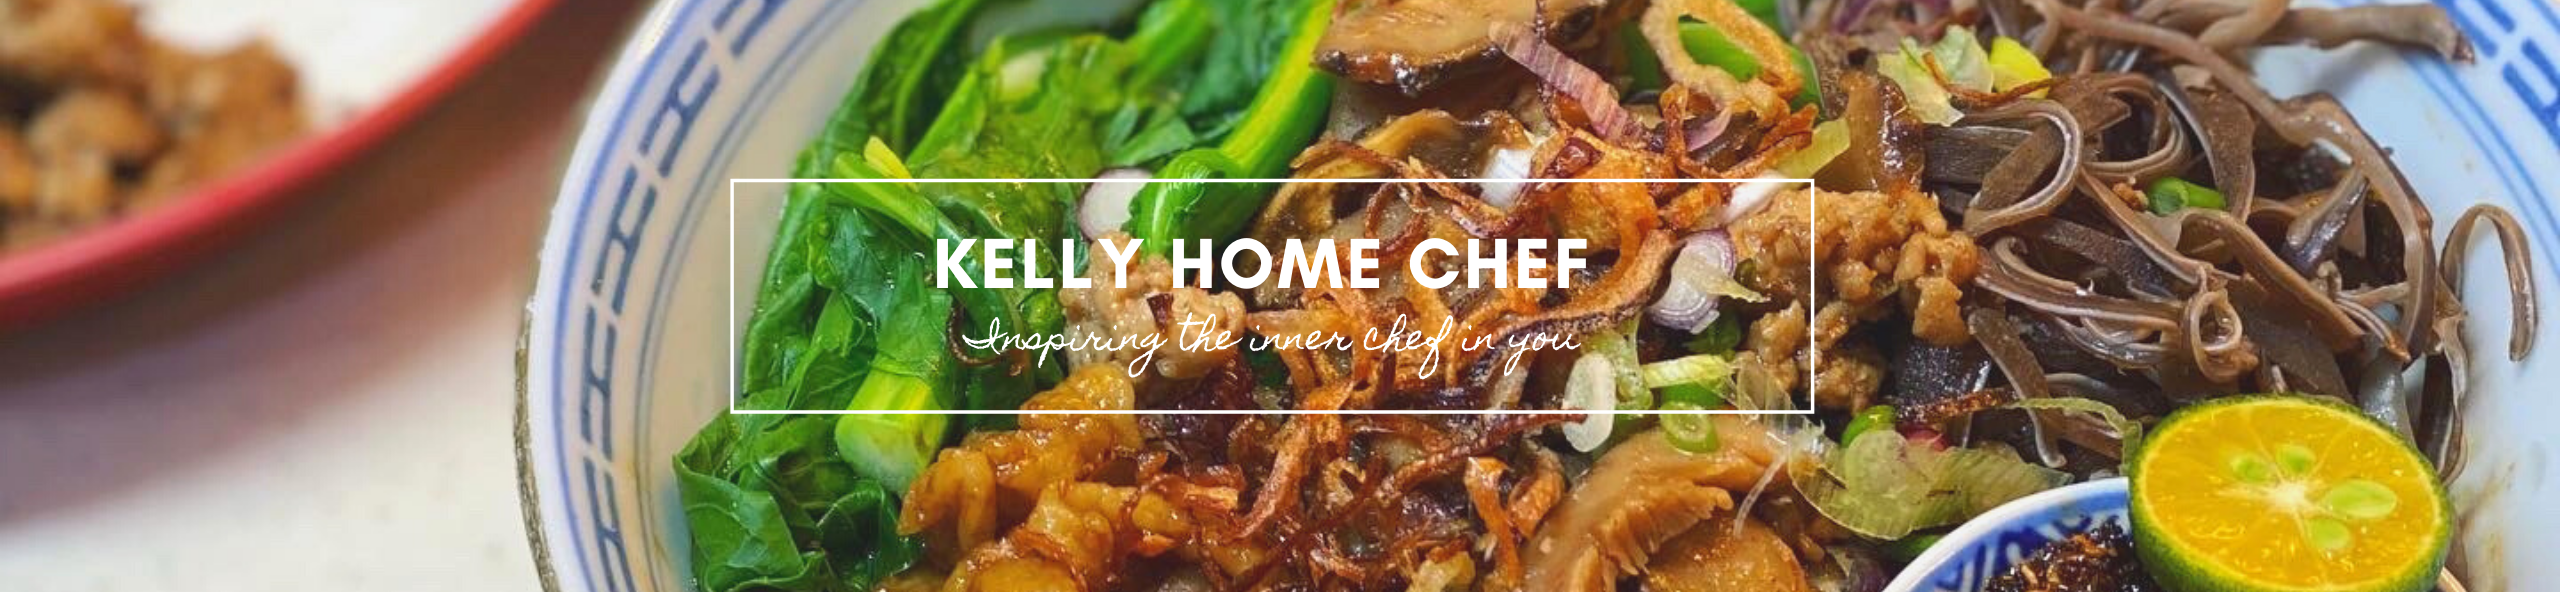 Kelly Home Chef